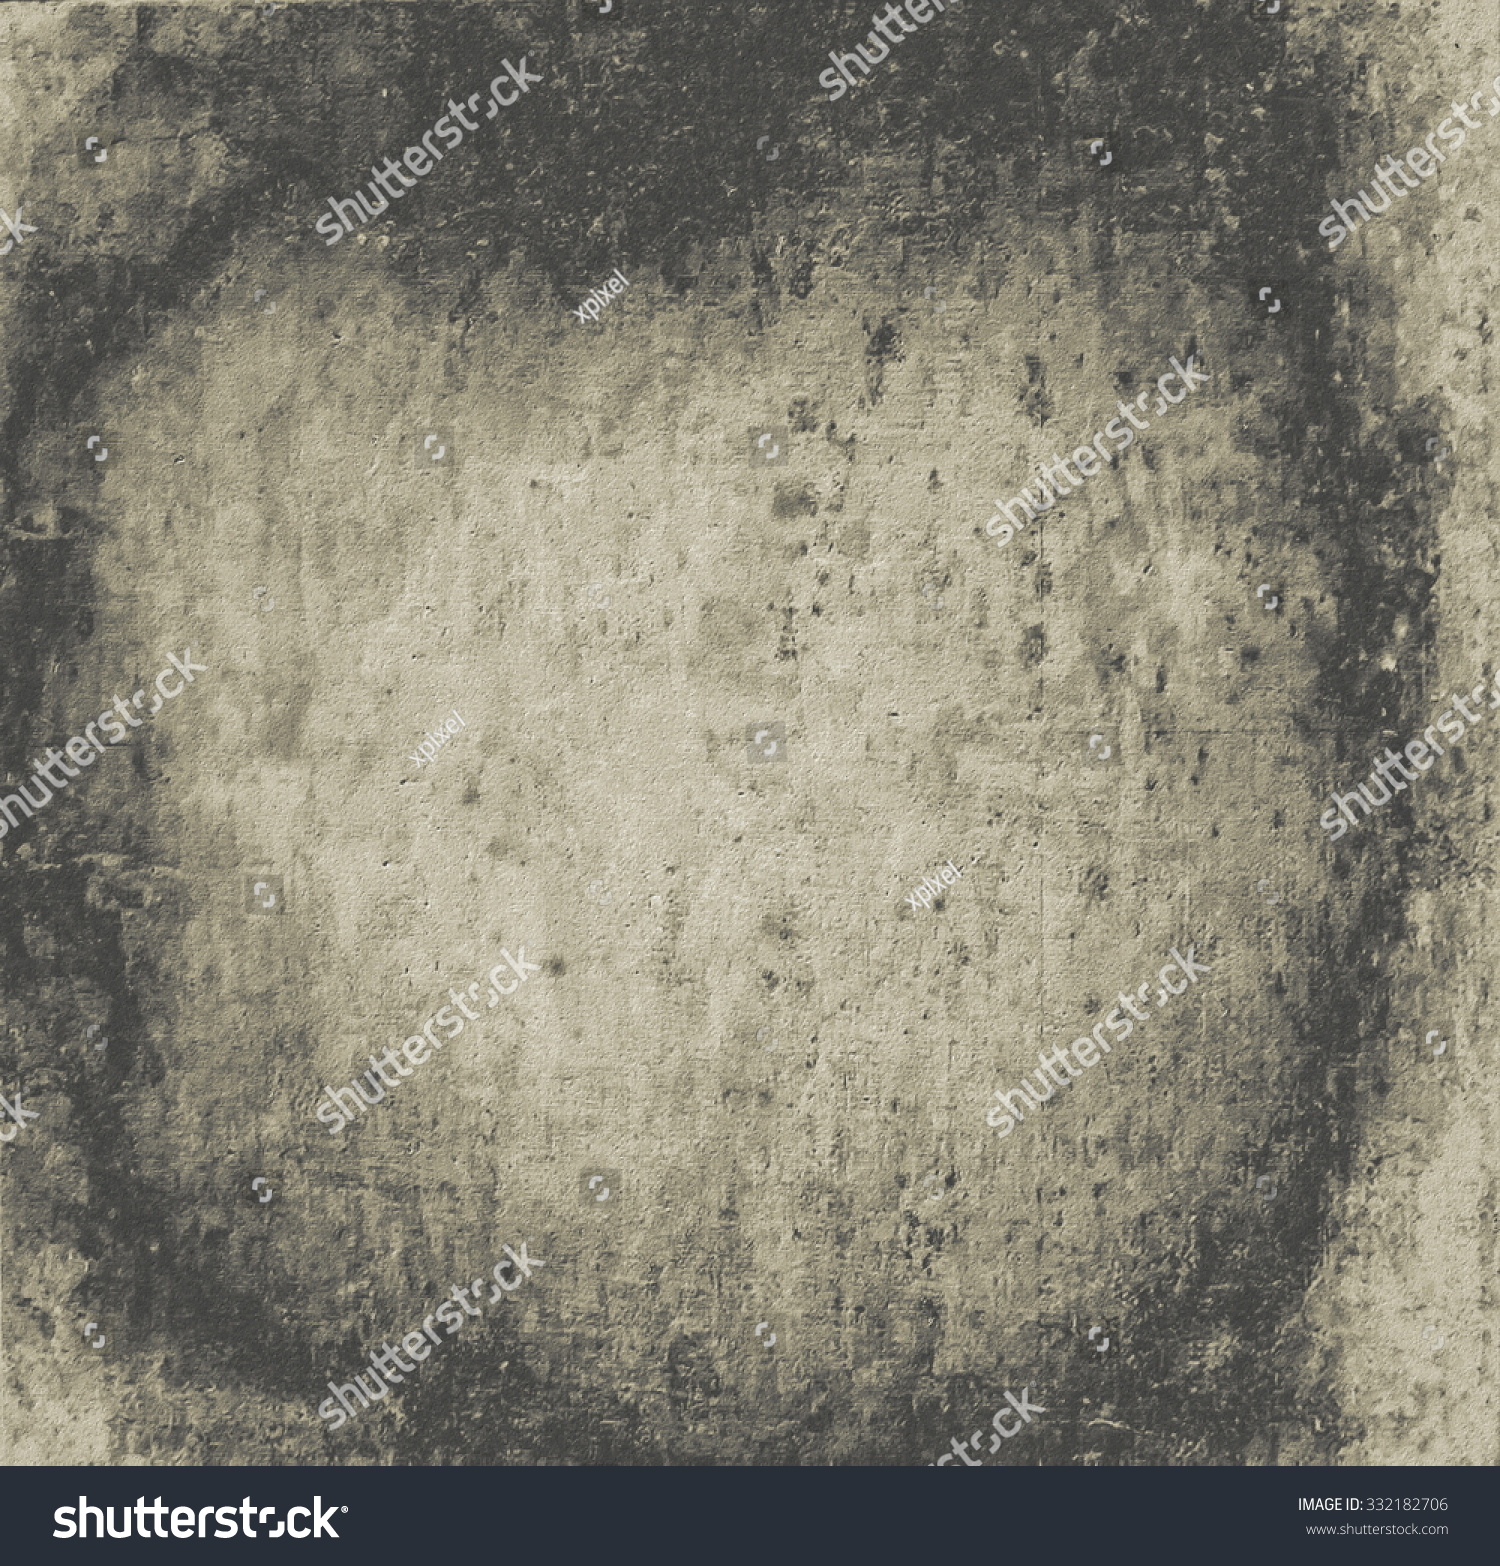 Abstract Grunge Vintage Stone Wall Background Stock Illustration ...